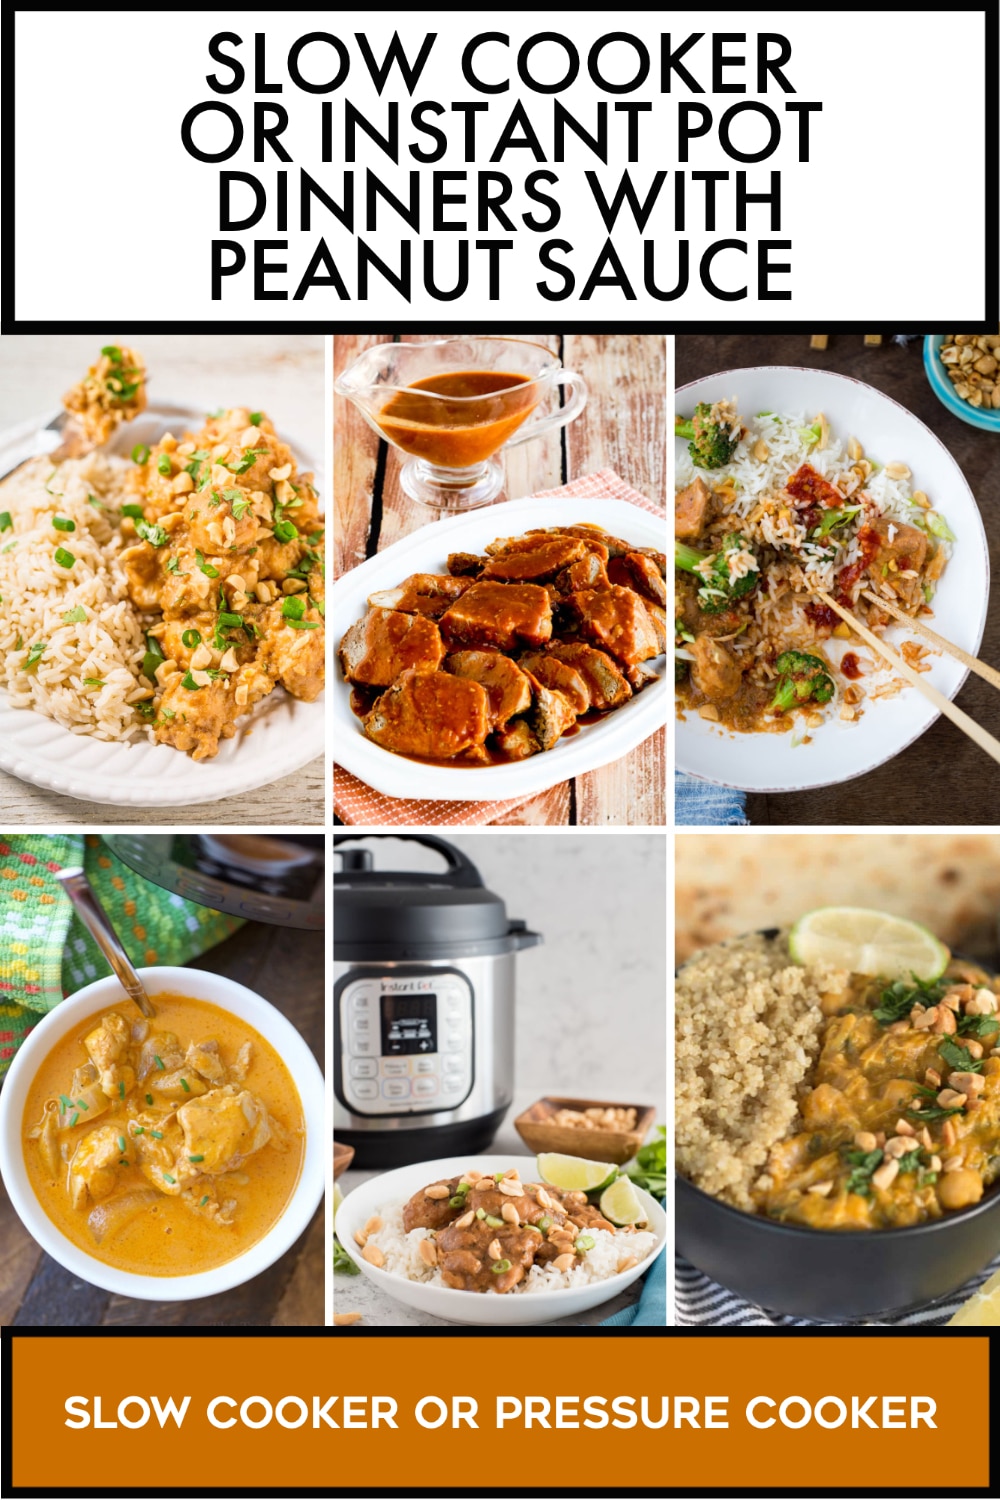 Pinterest image of Slow Cooker or Instant Pot Dinners with Peanut Sauce